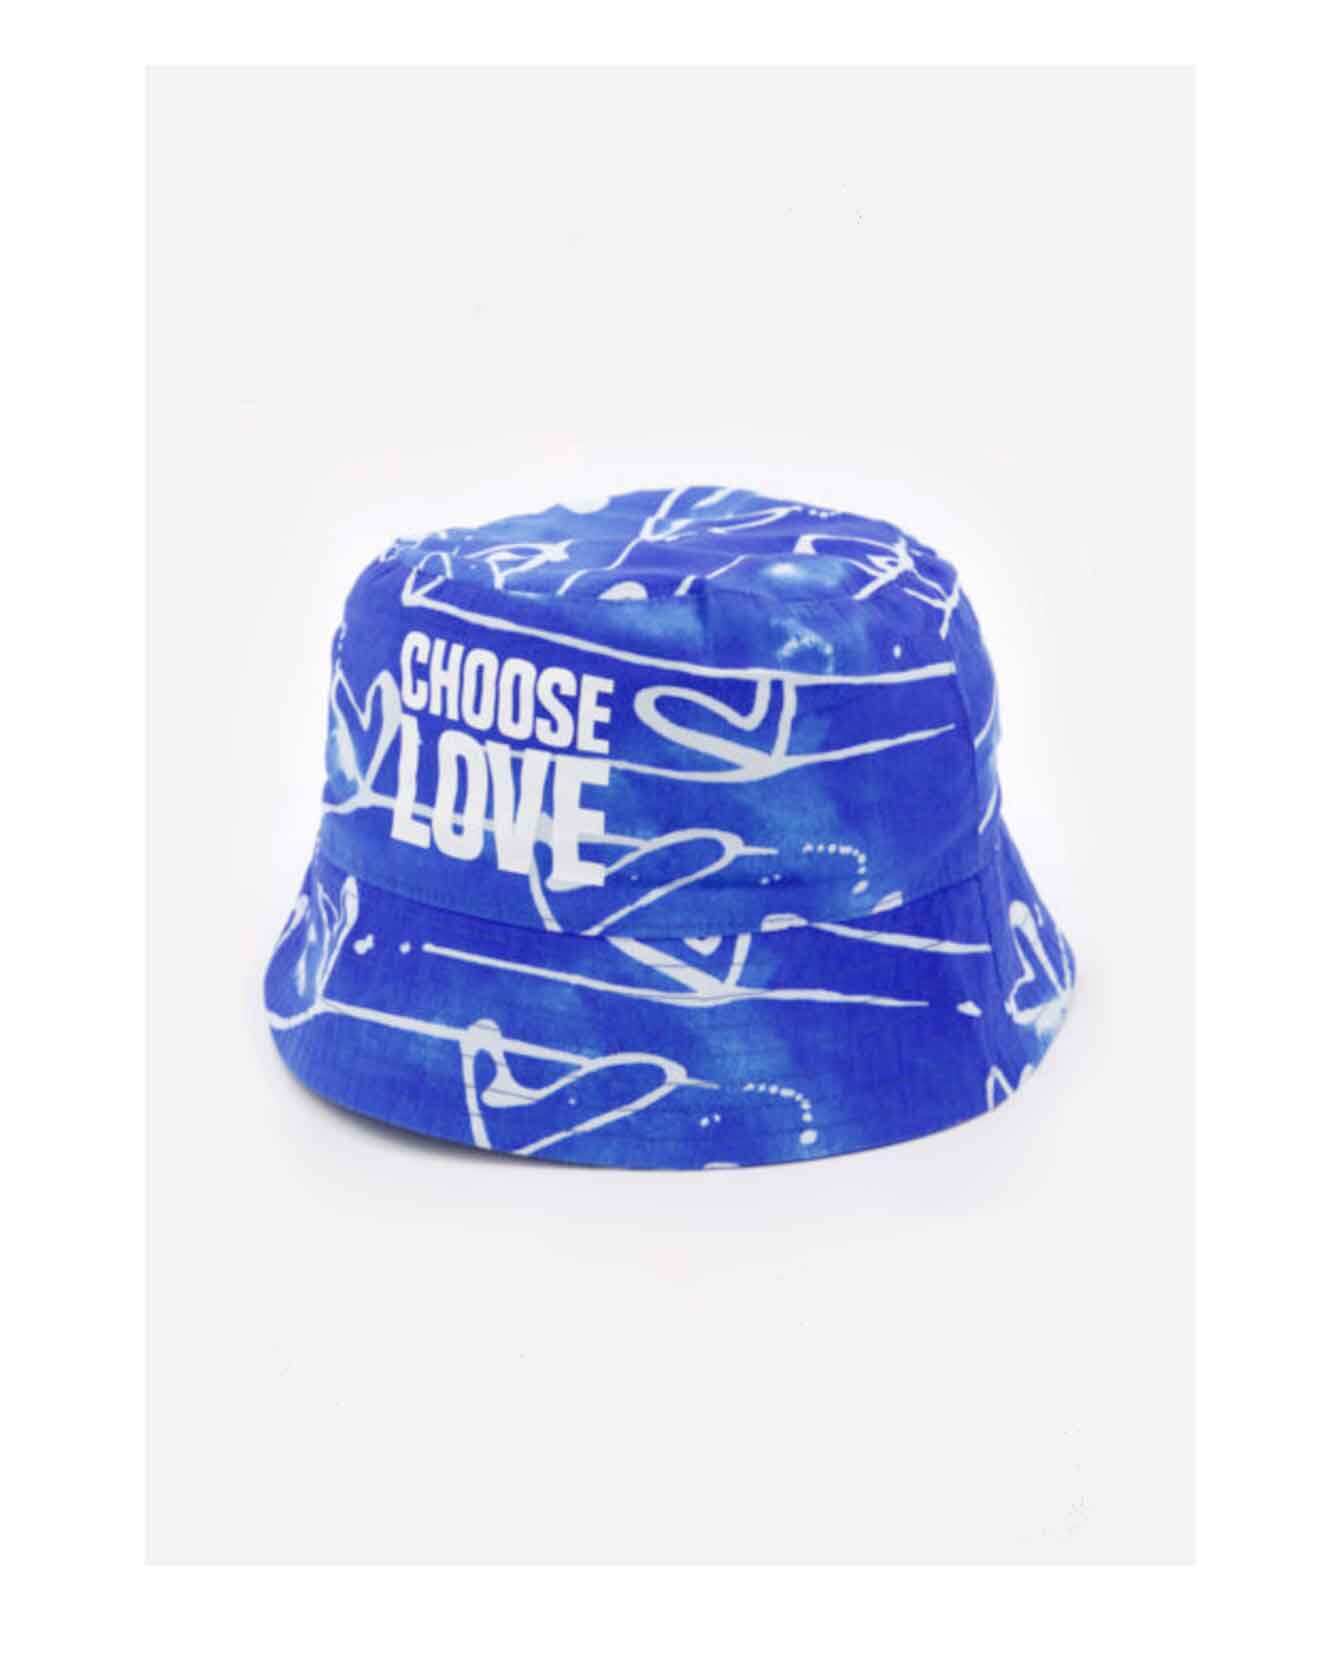 Illustrated patterned blue bucket hat as part of a range of merchandise for CHOOSE LOVE charity in collaboration with TK Maxx and Print Club London. Repeat pattern of linear love hearts with a watercolour gradient ink background. Blue ink background.